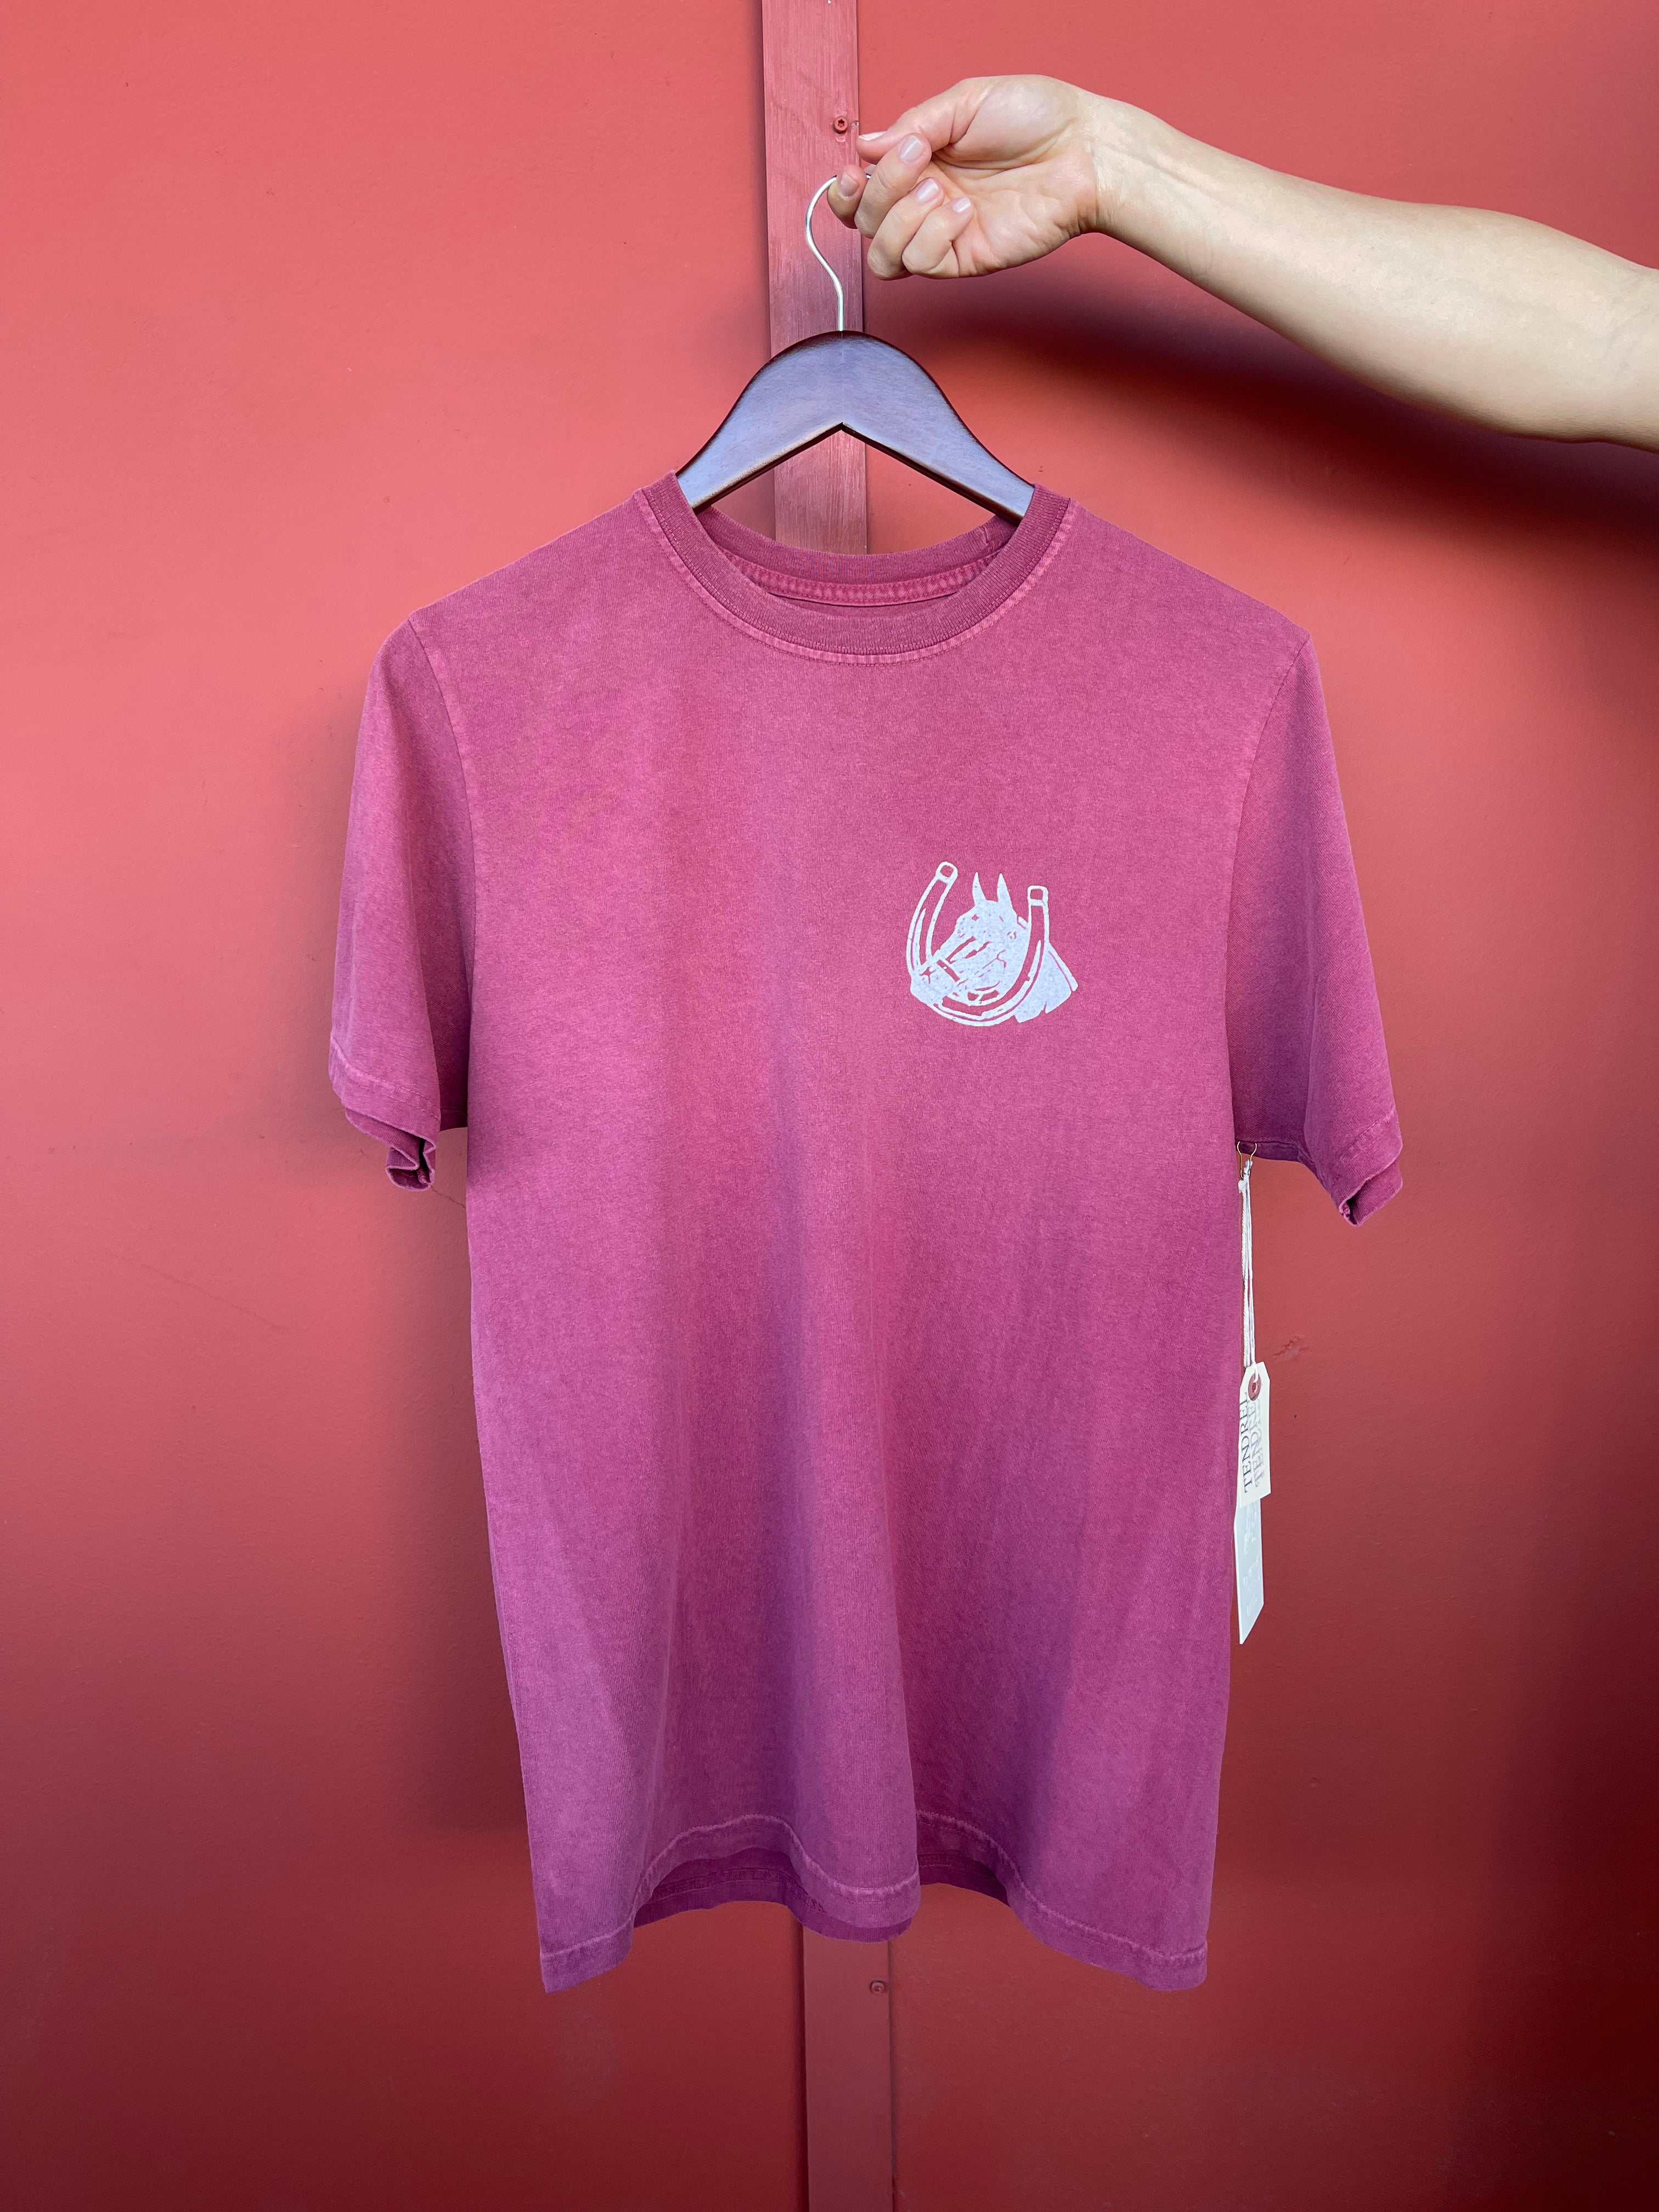 One of These Days - Valley Riders Tee Burgundy